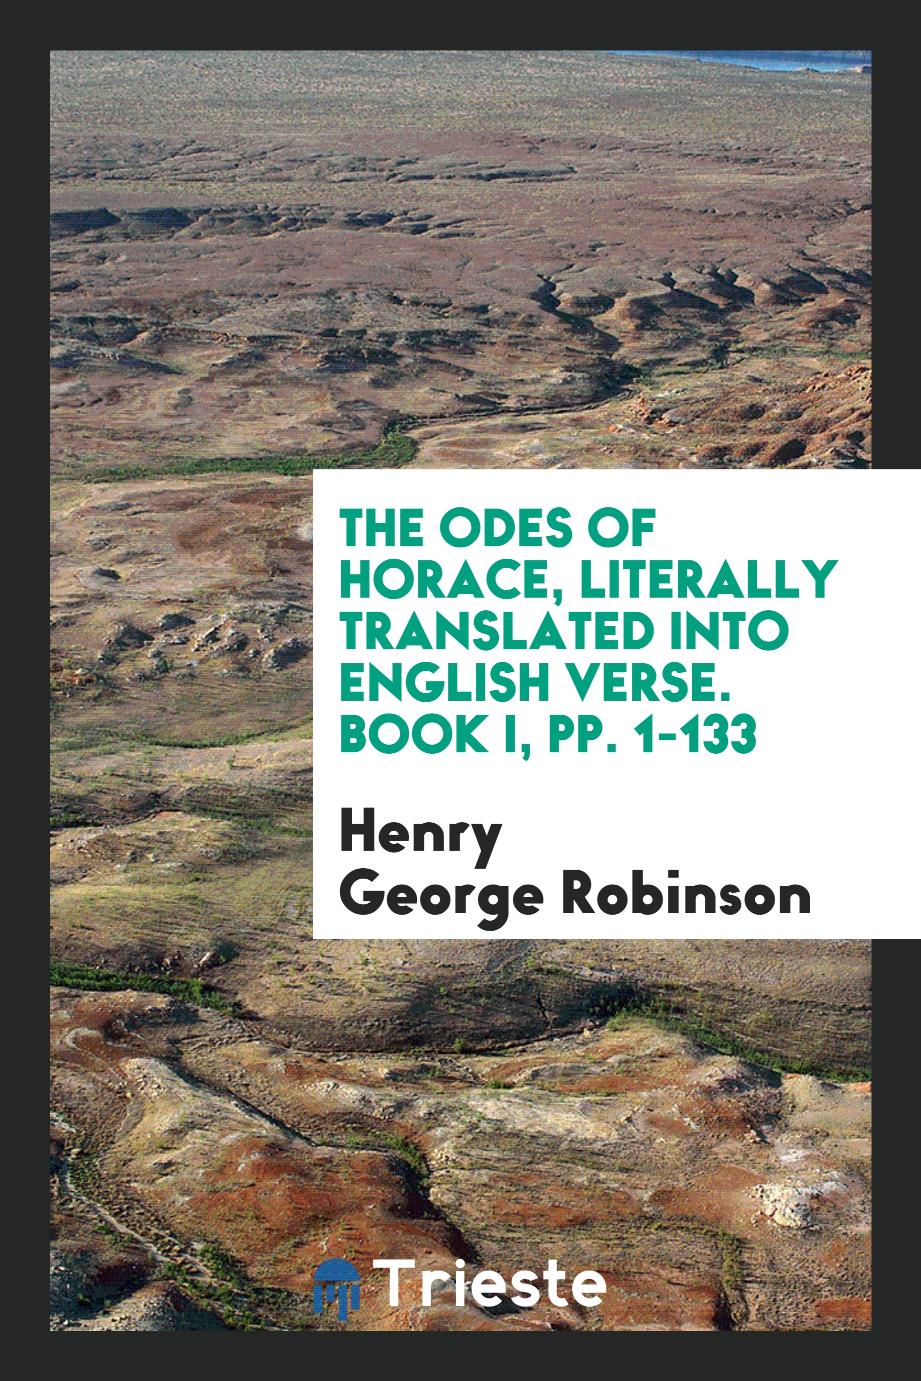 The Odes of Horace, Literally Translated into English Verse. Book I, pp. 1-133